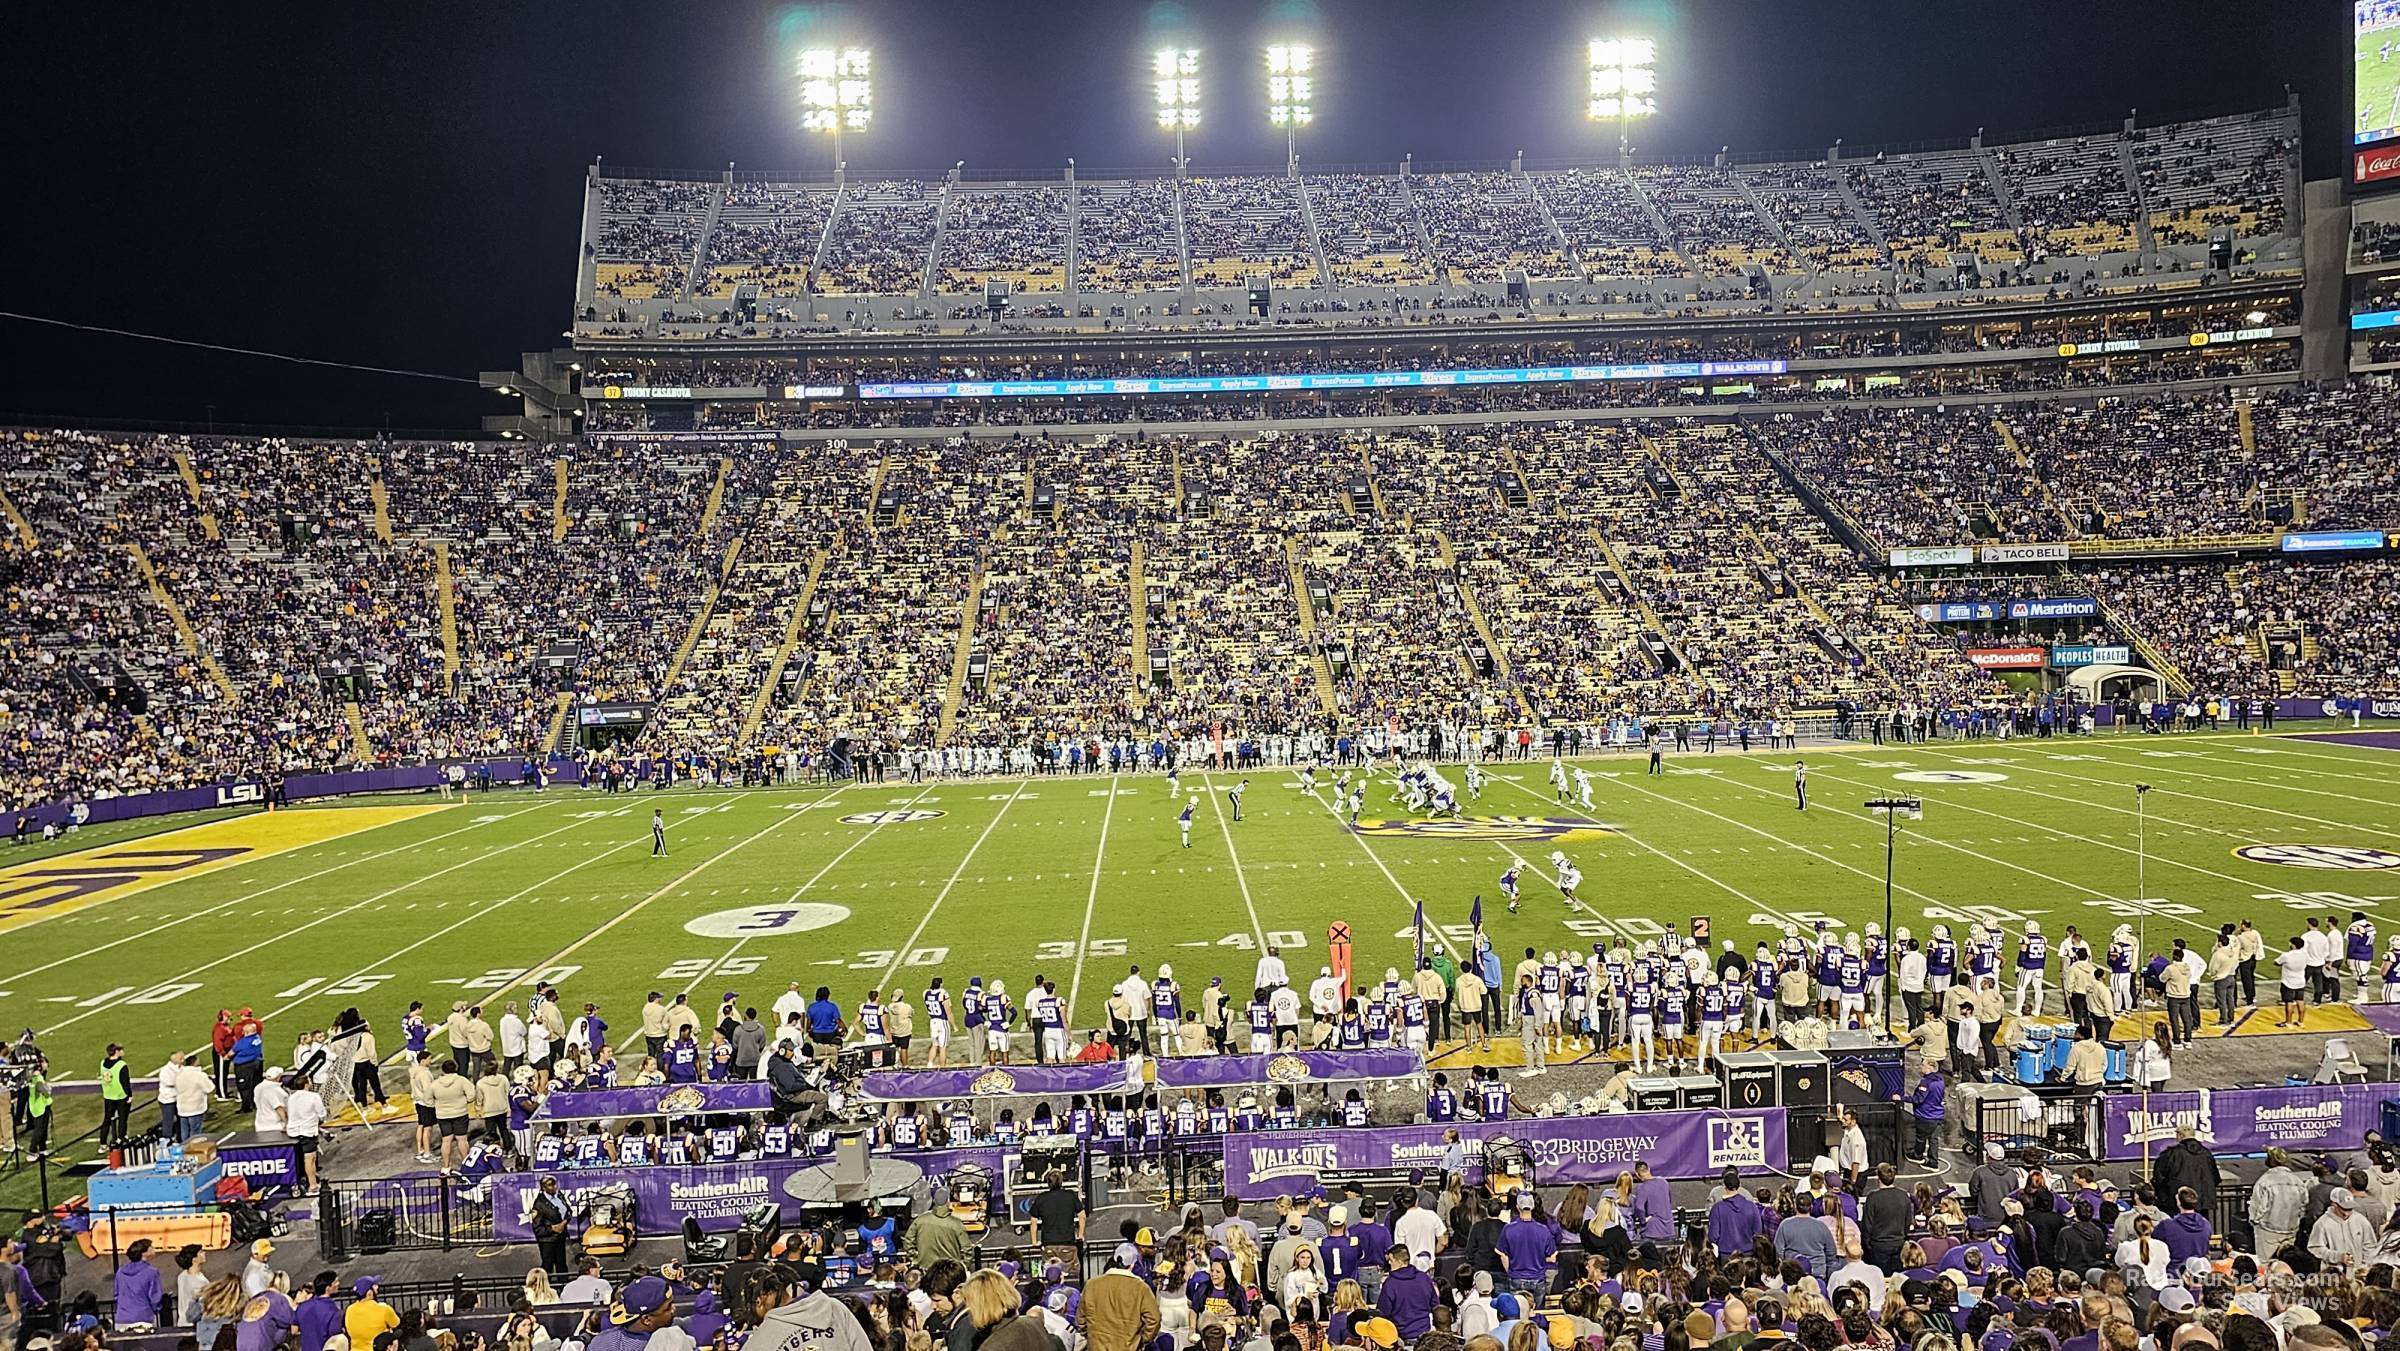 section 104, row 26 seat view  - tiger stadium